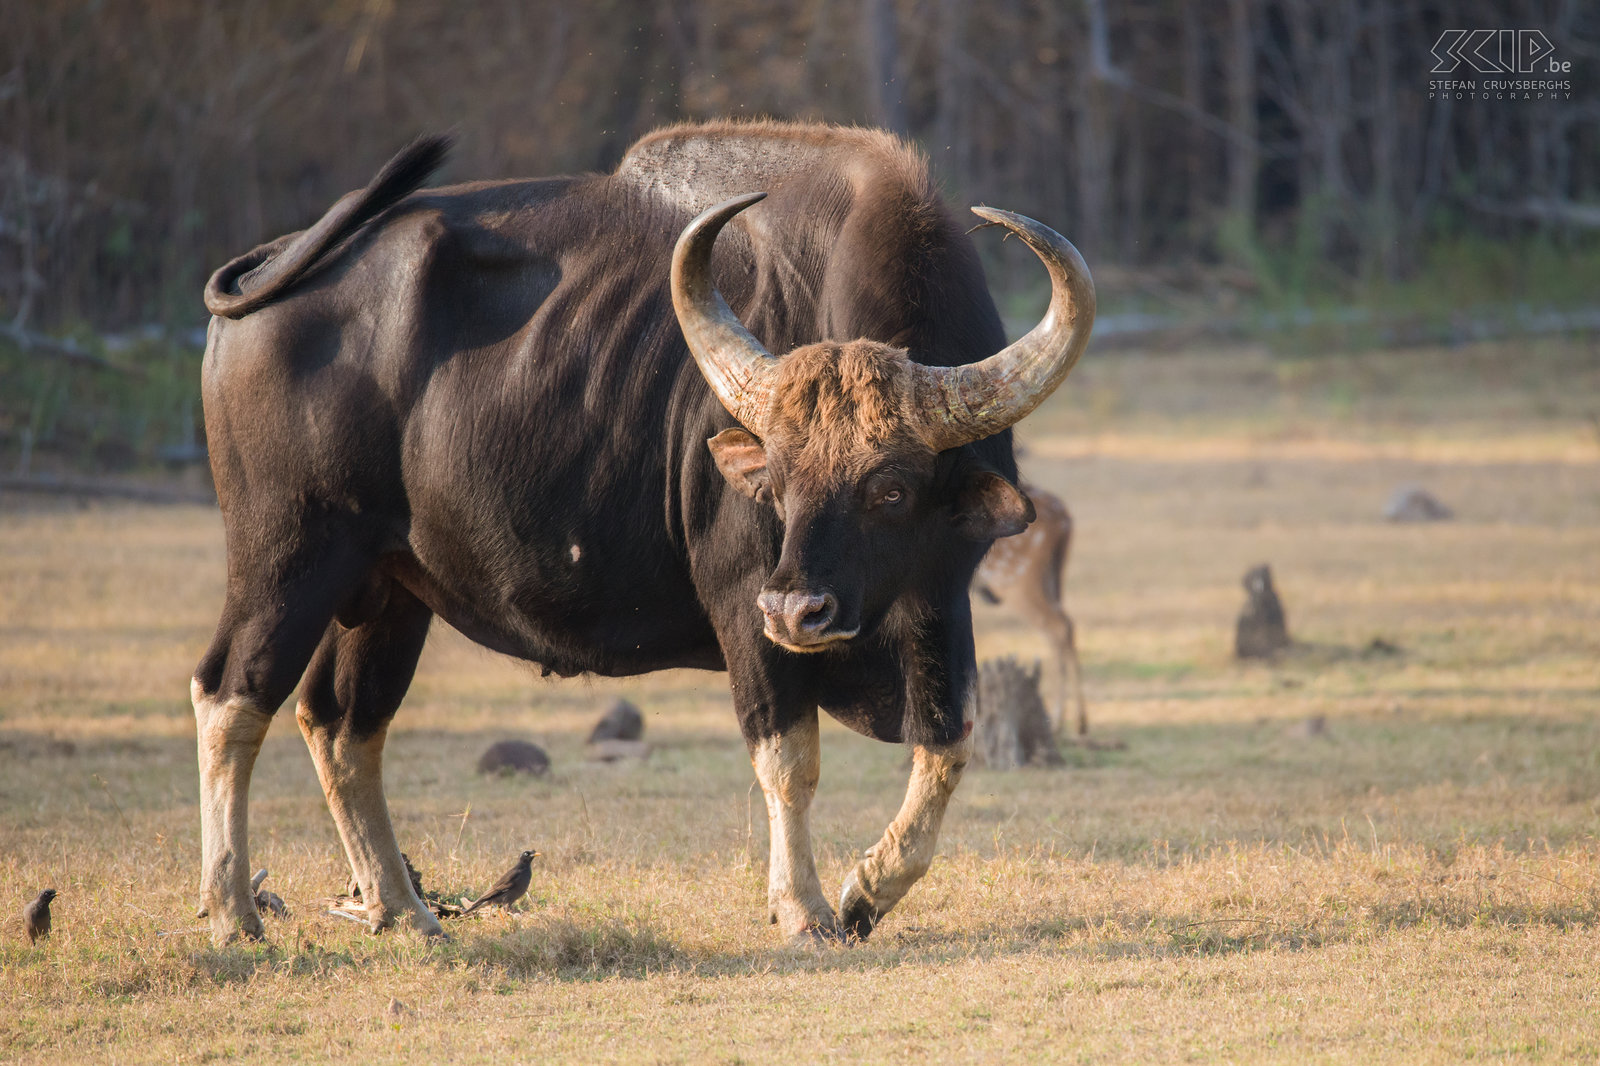 Kabini - Gaur A large gaur bull can weigh up to 1500kg. Males are about one-fourth larger and heavier than females. Stefan Cruysberghs